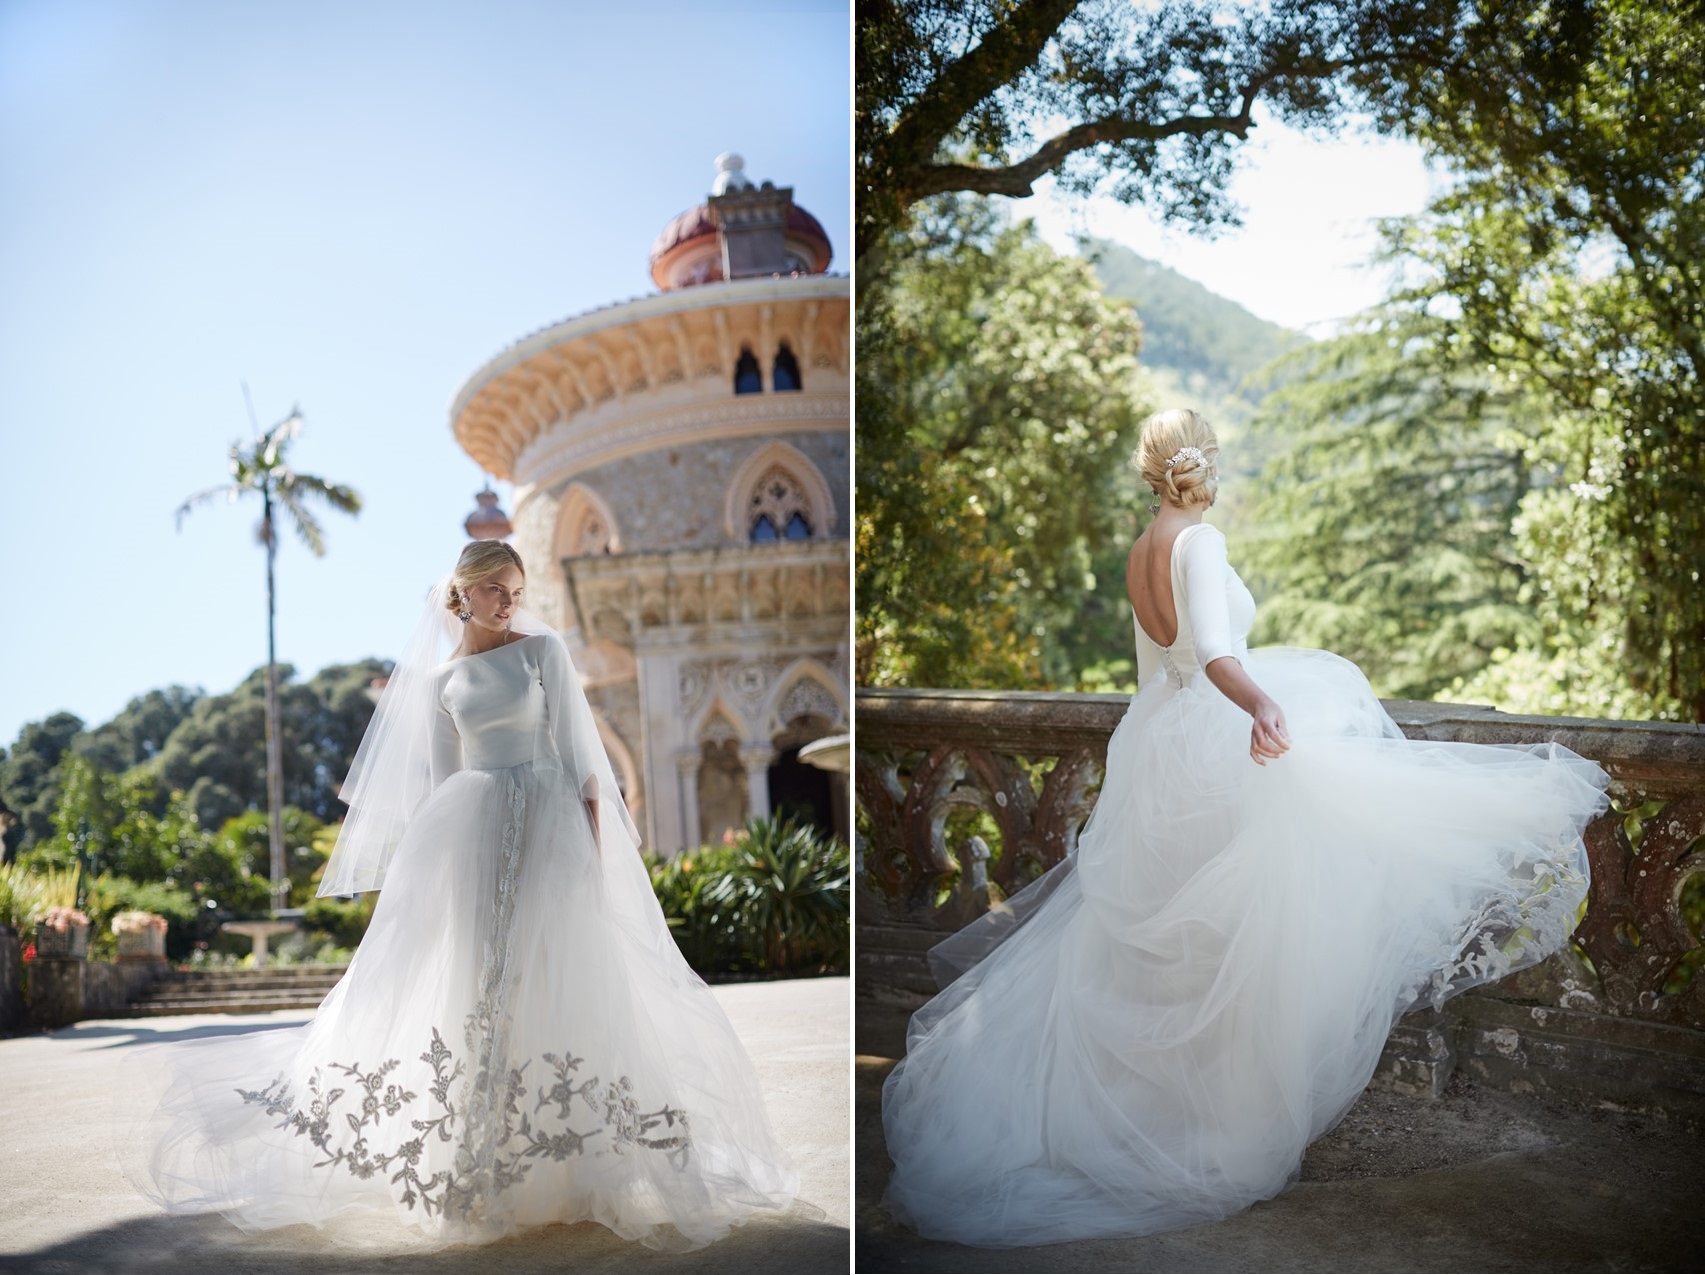 'Twice Enchanted' BHLDN's Dreamy New Collection for Fall 2015